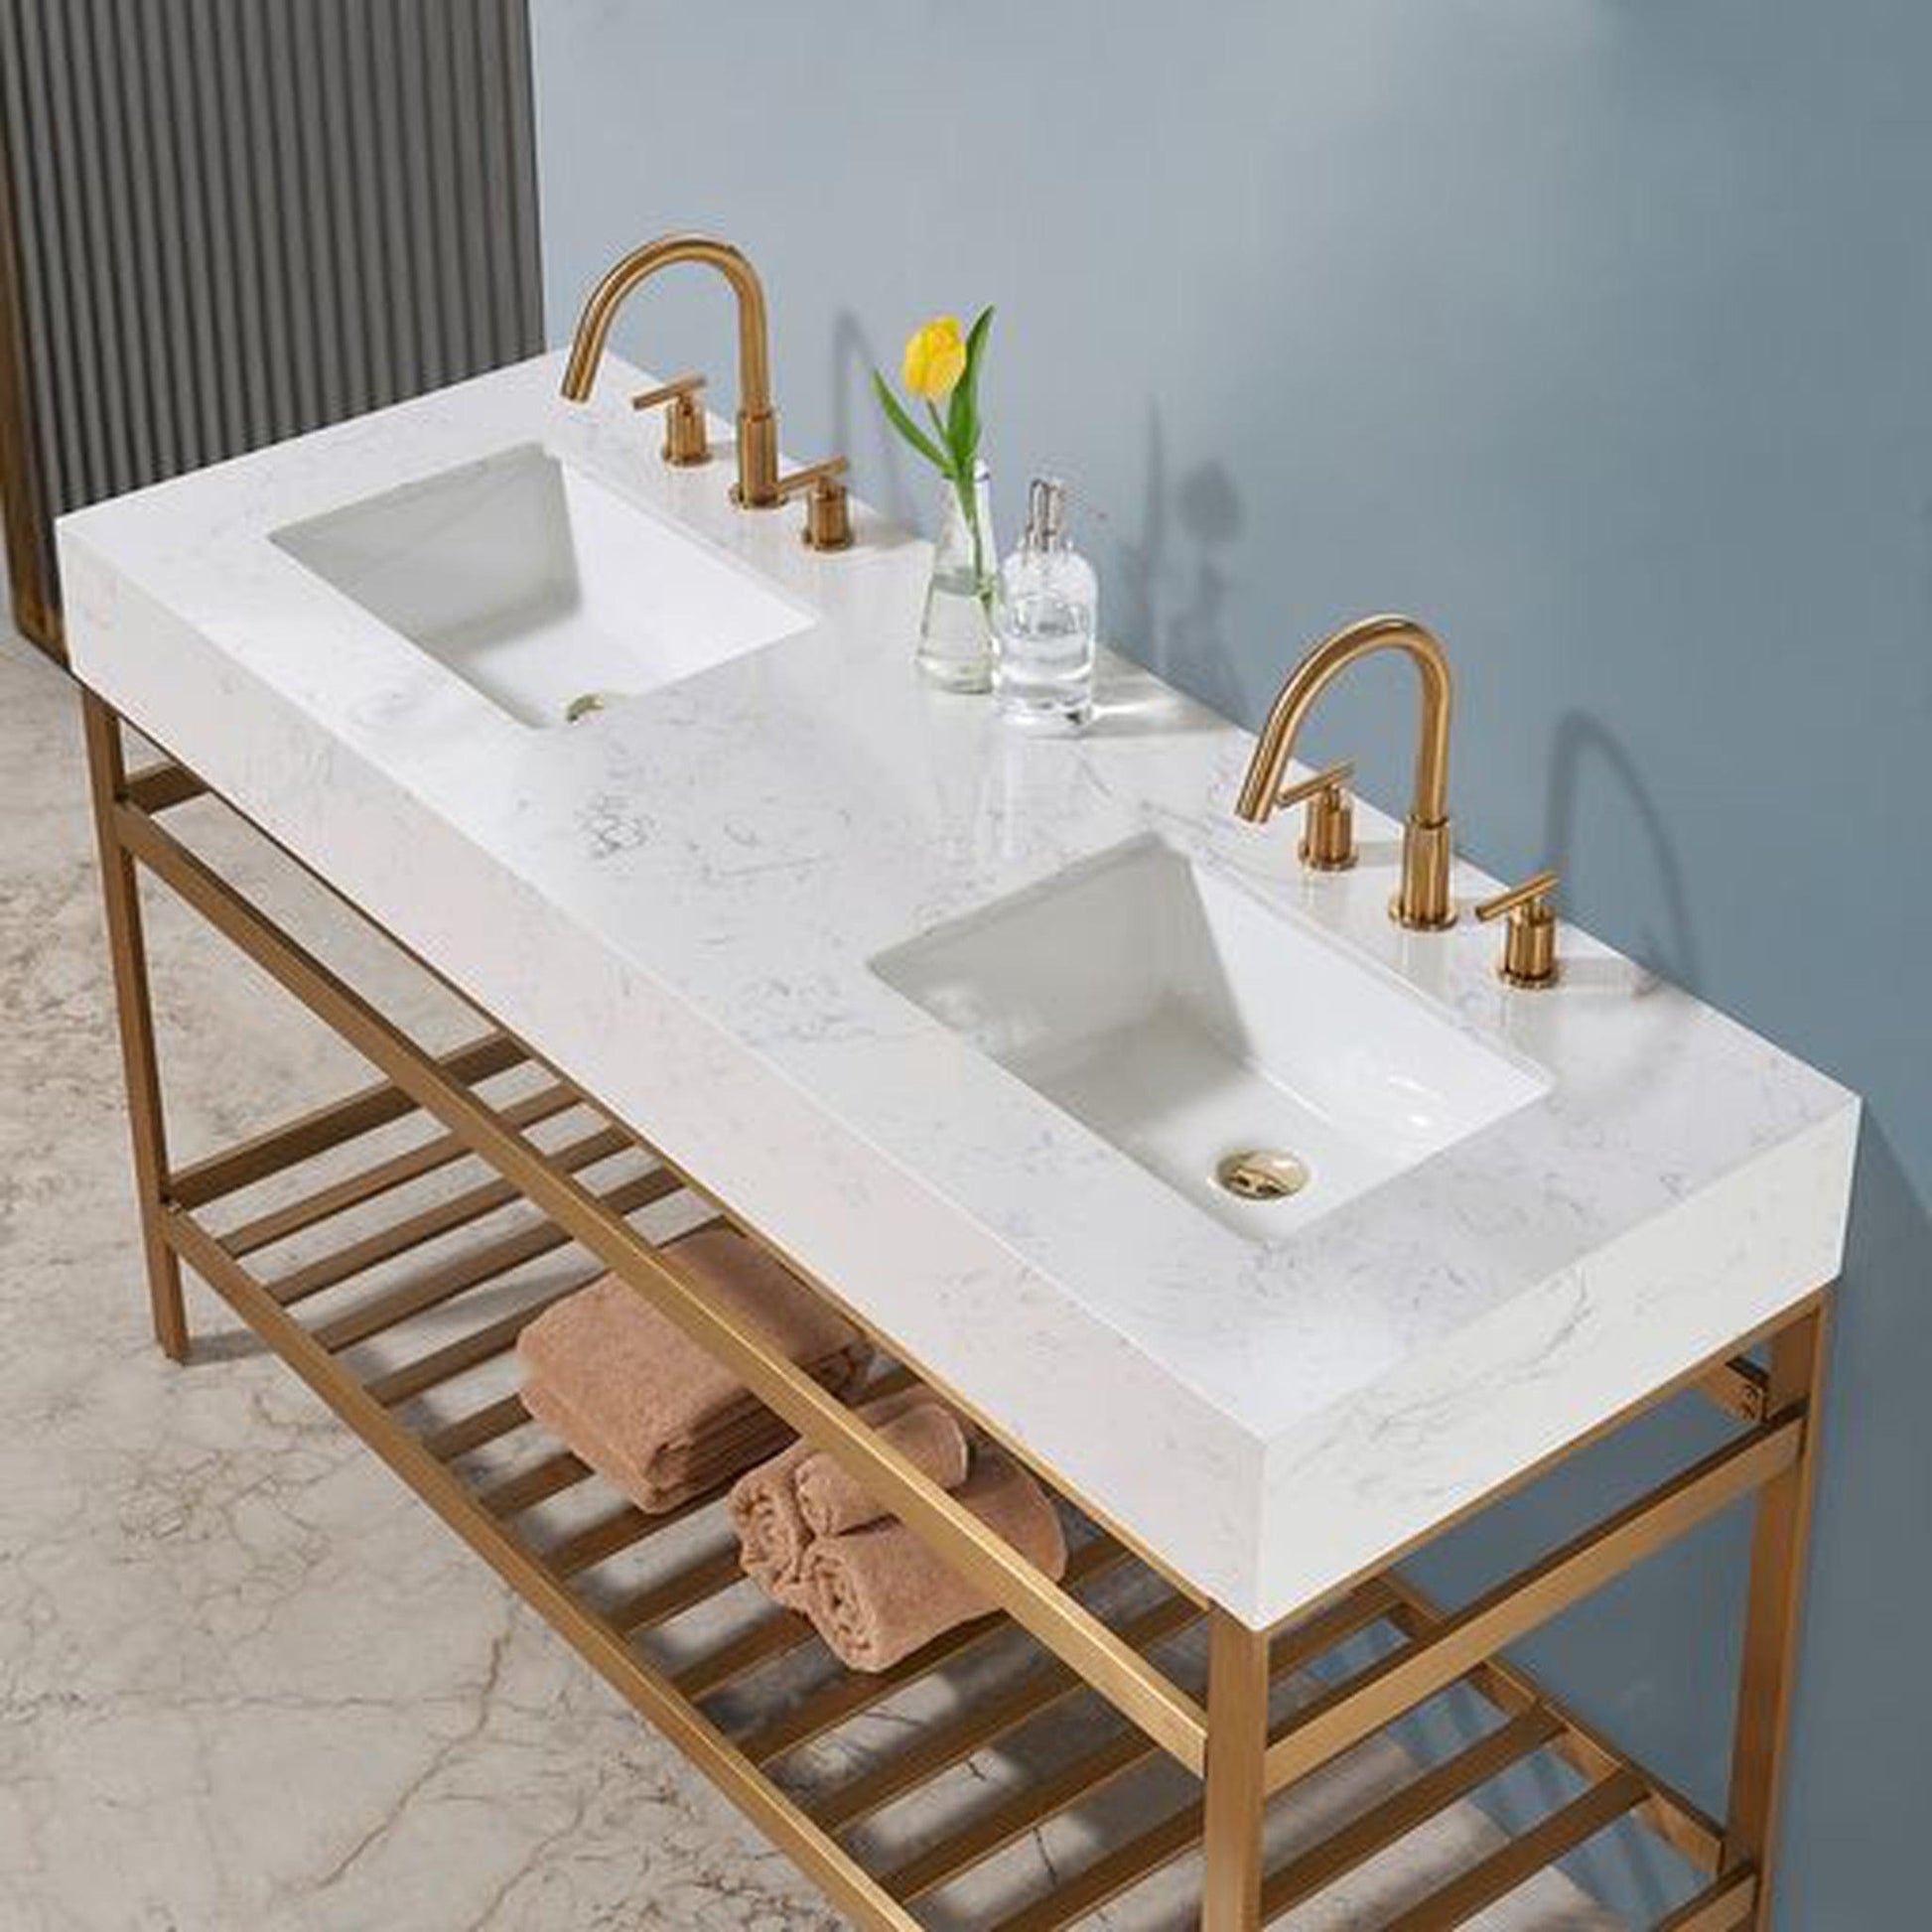 Altair Merano 60" Brushed Gold Double Stainless Steel Bathroom Vanity Set Console With Aosta White Stone Top, Two Rectangular Undermount Ceramic Sinks, and Safety Overflow Hole